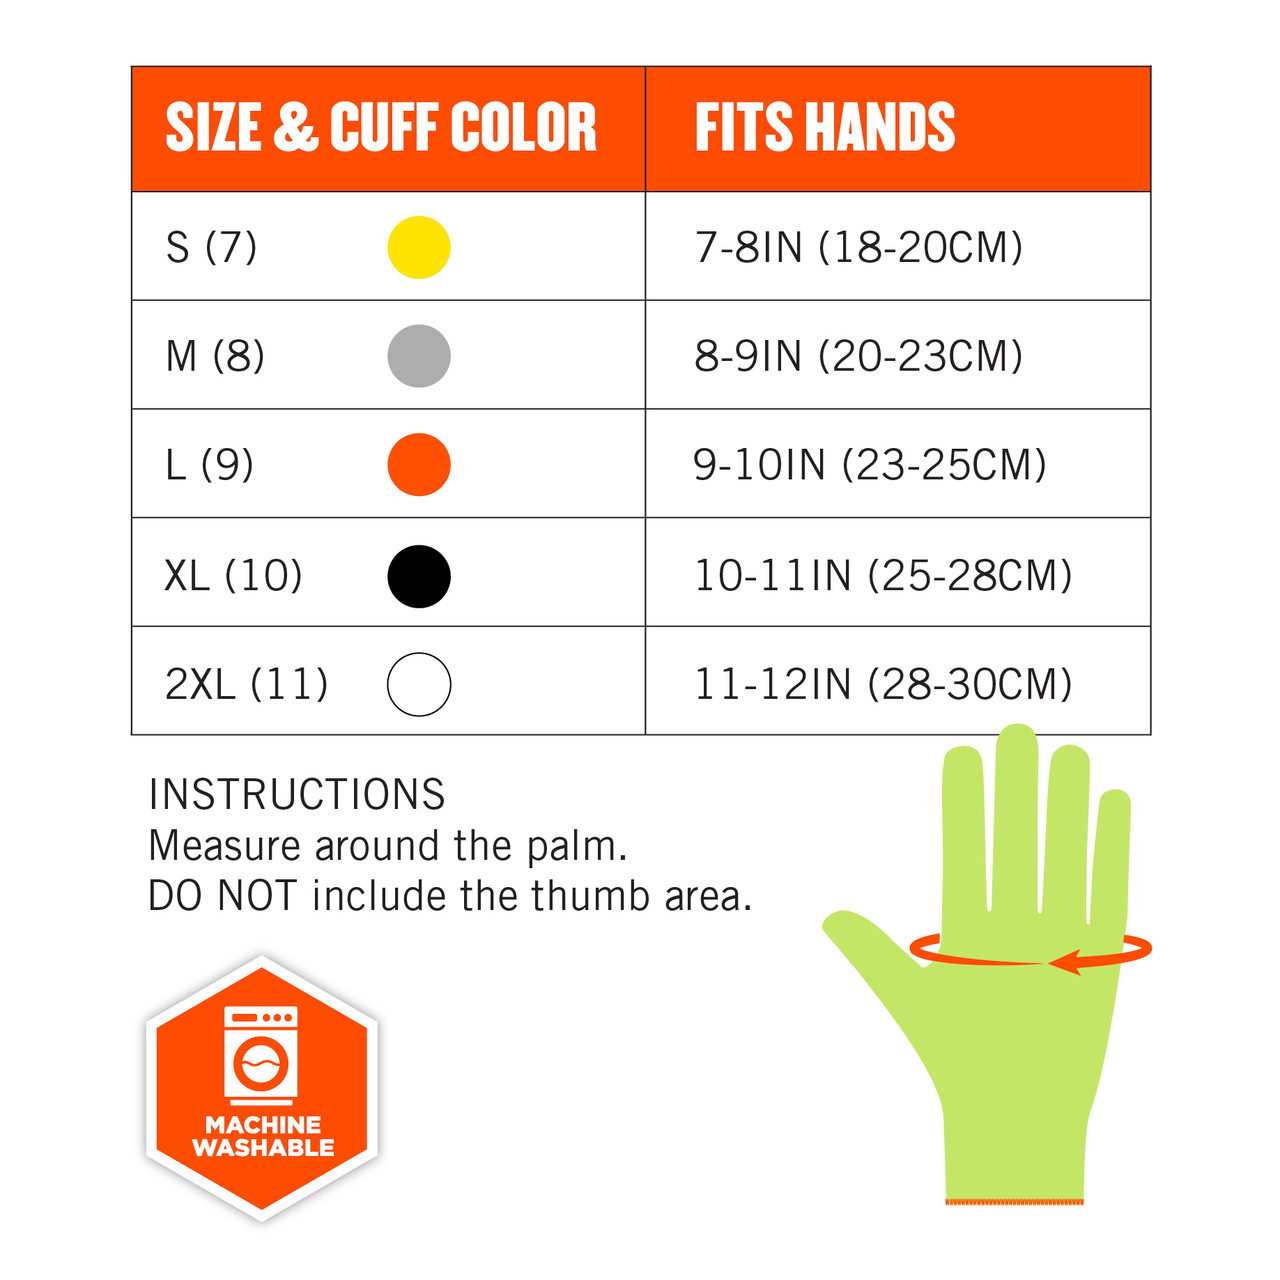 https://cdn11.bigcommerce.com/s-8715e/images/stencil/1280x1280/products/362864/684395/18022-7040-case-cut-resistant-food-grade-gloves-lime-size-chart_0__69294.1702331798.jpg?c=2?imbypass=on